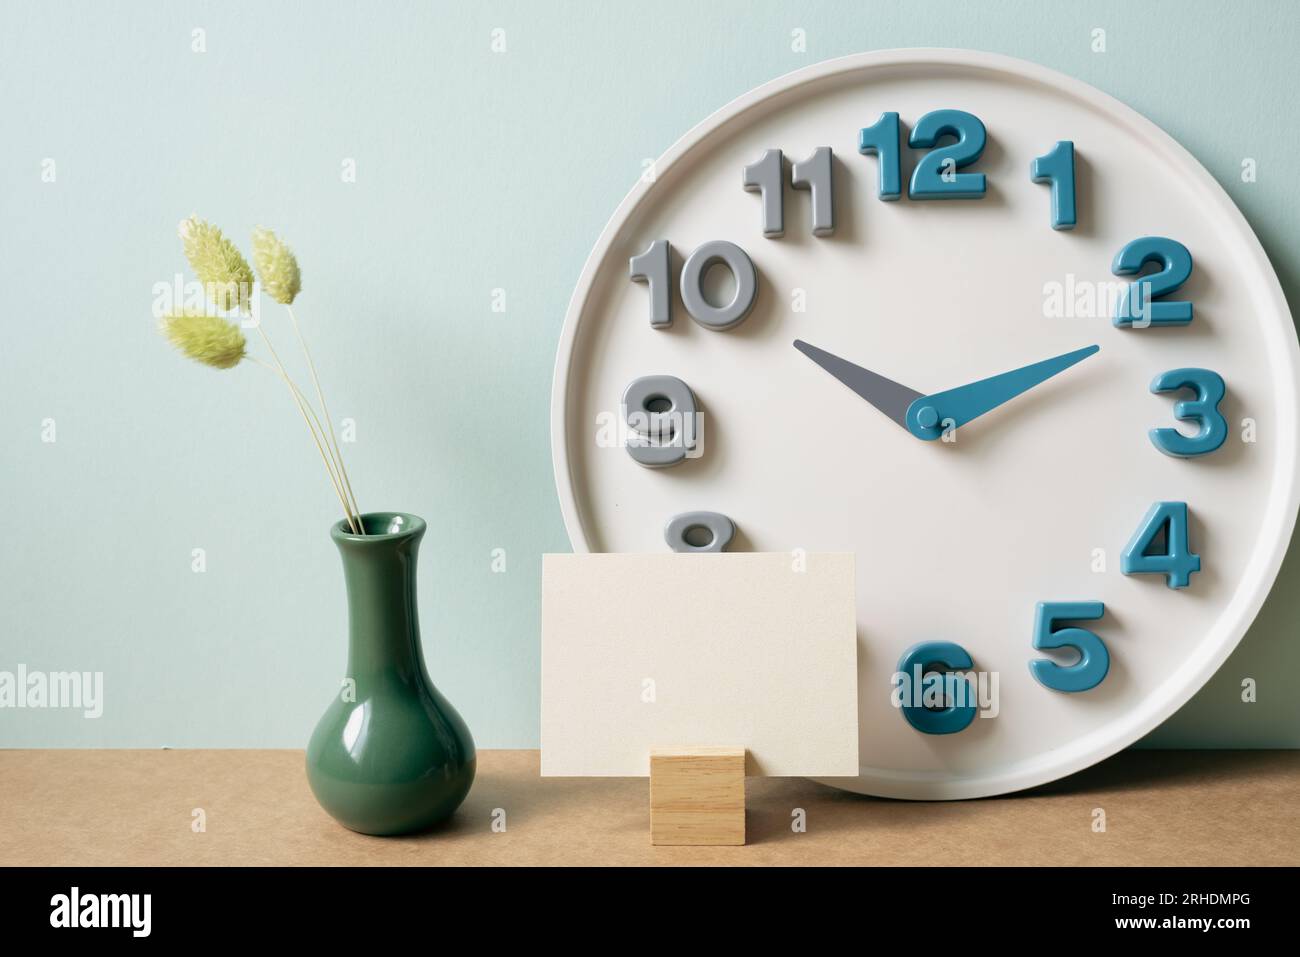 Memo pad holder, clock, vase of dry plant on brown desk. mint wall background. workspace, copy space Stock Photo